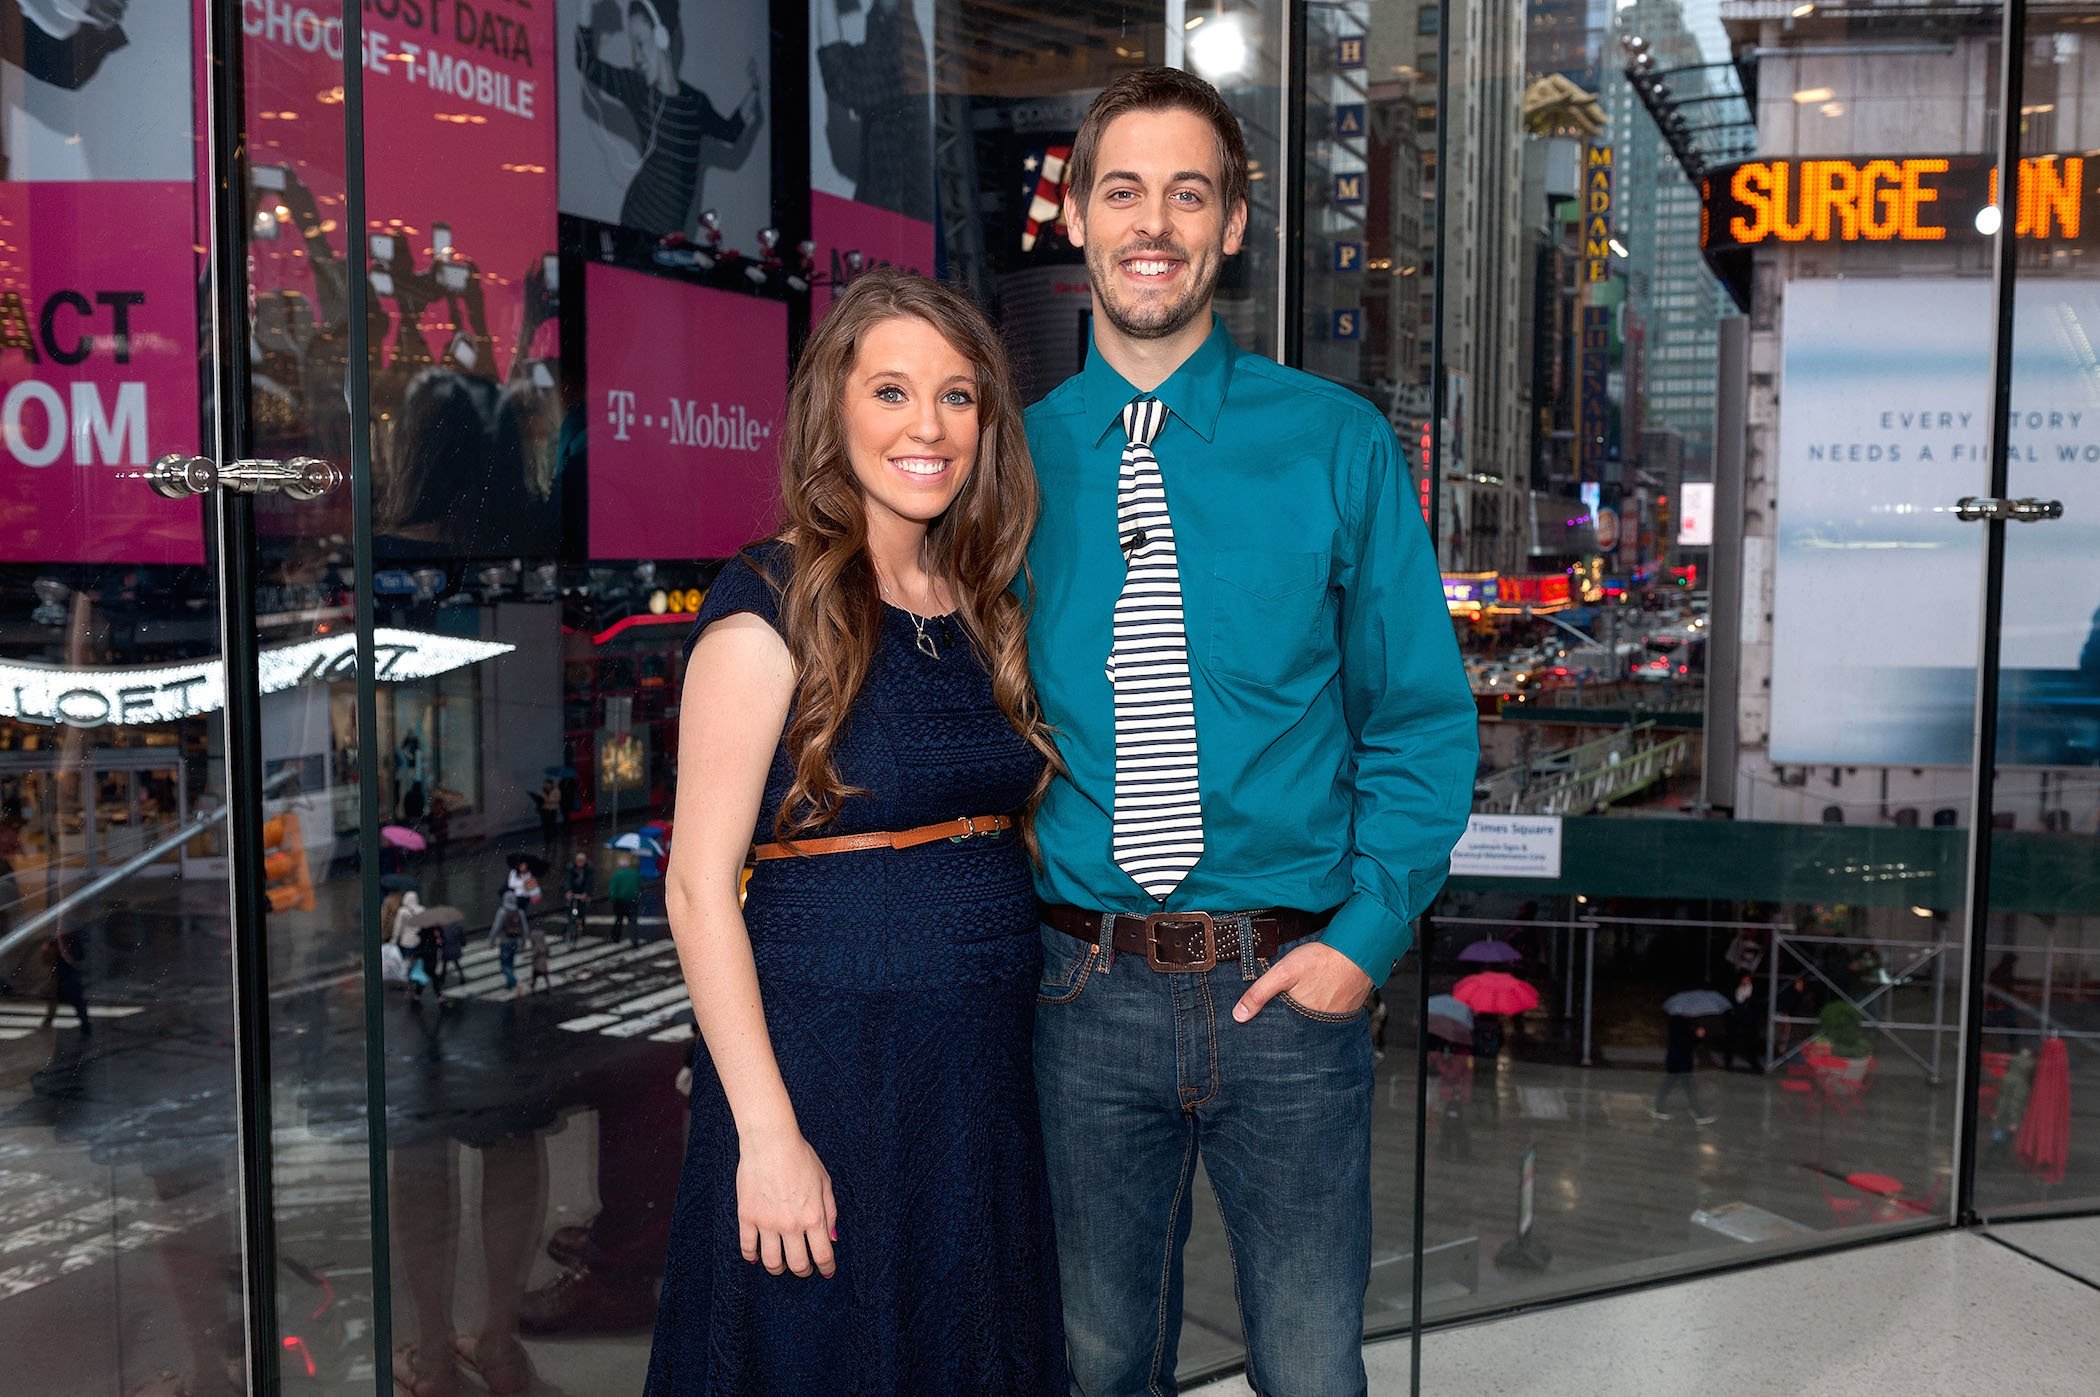 Former 'Counting On' stars Jill Duggar Dillard (L) from the Duggar family standing next to her husband, Derick Dillard, while visiting 'Extra' at their New York studios